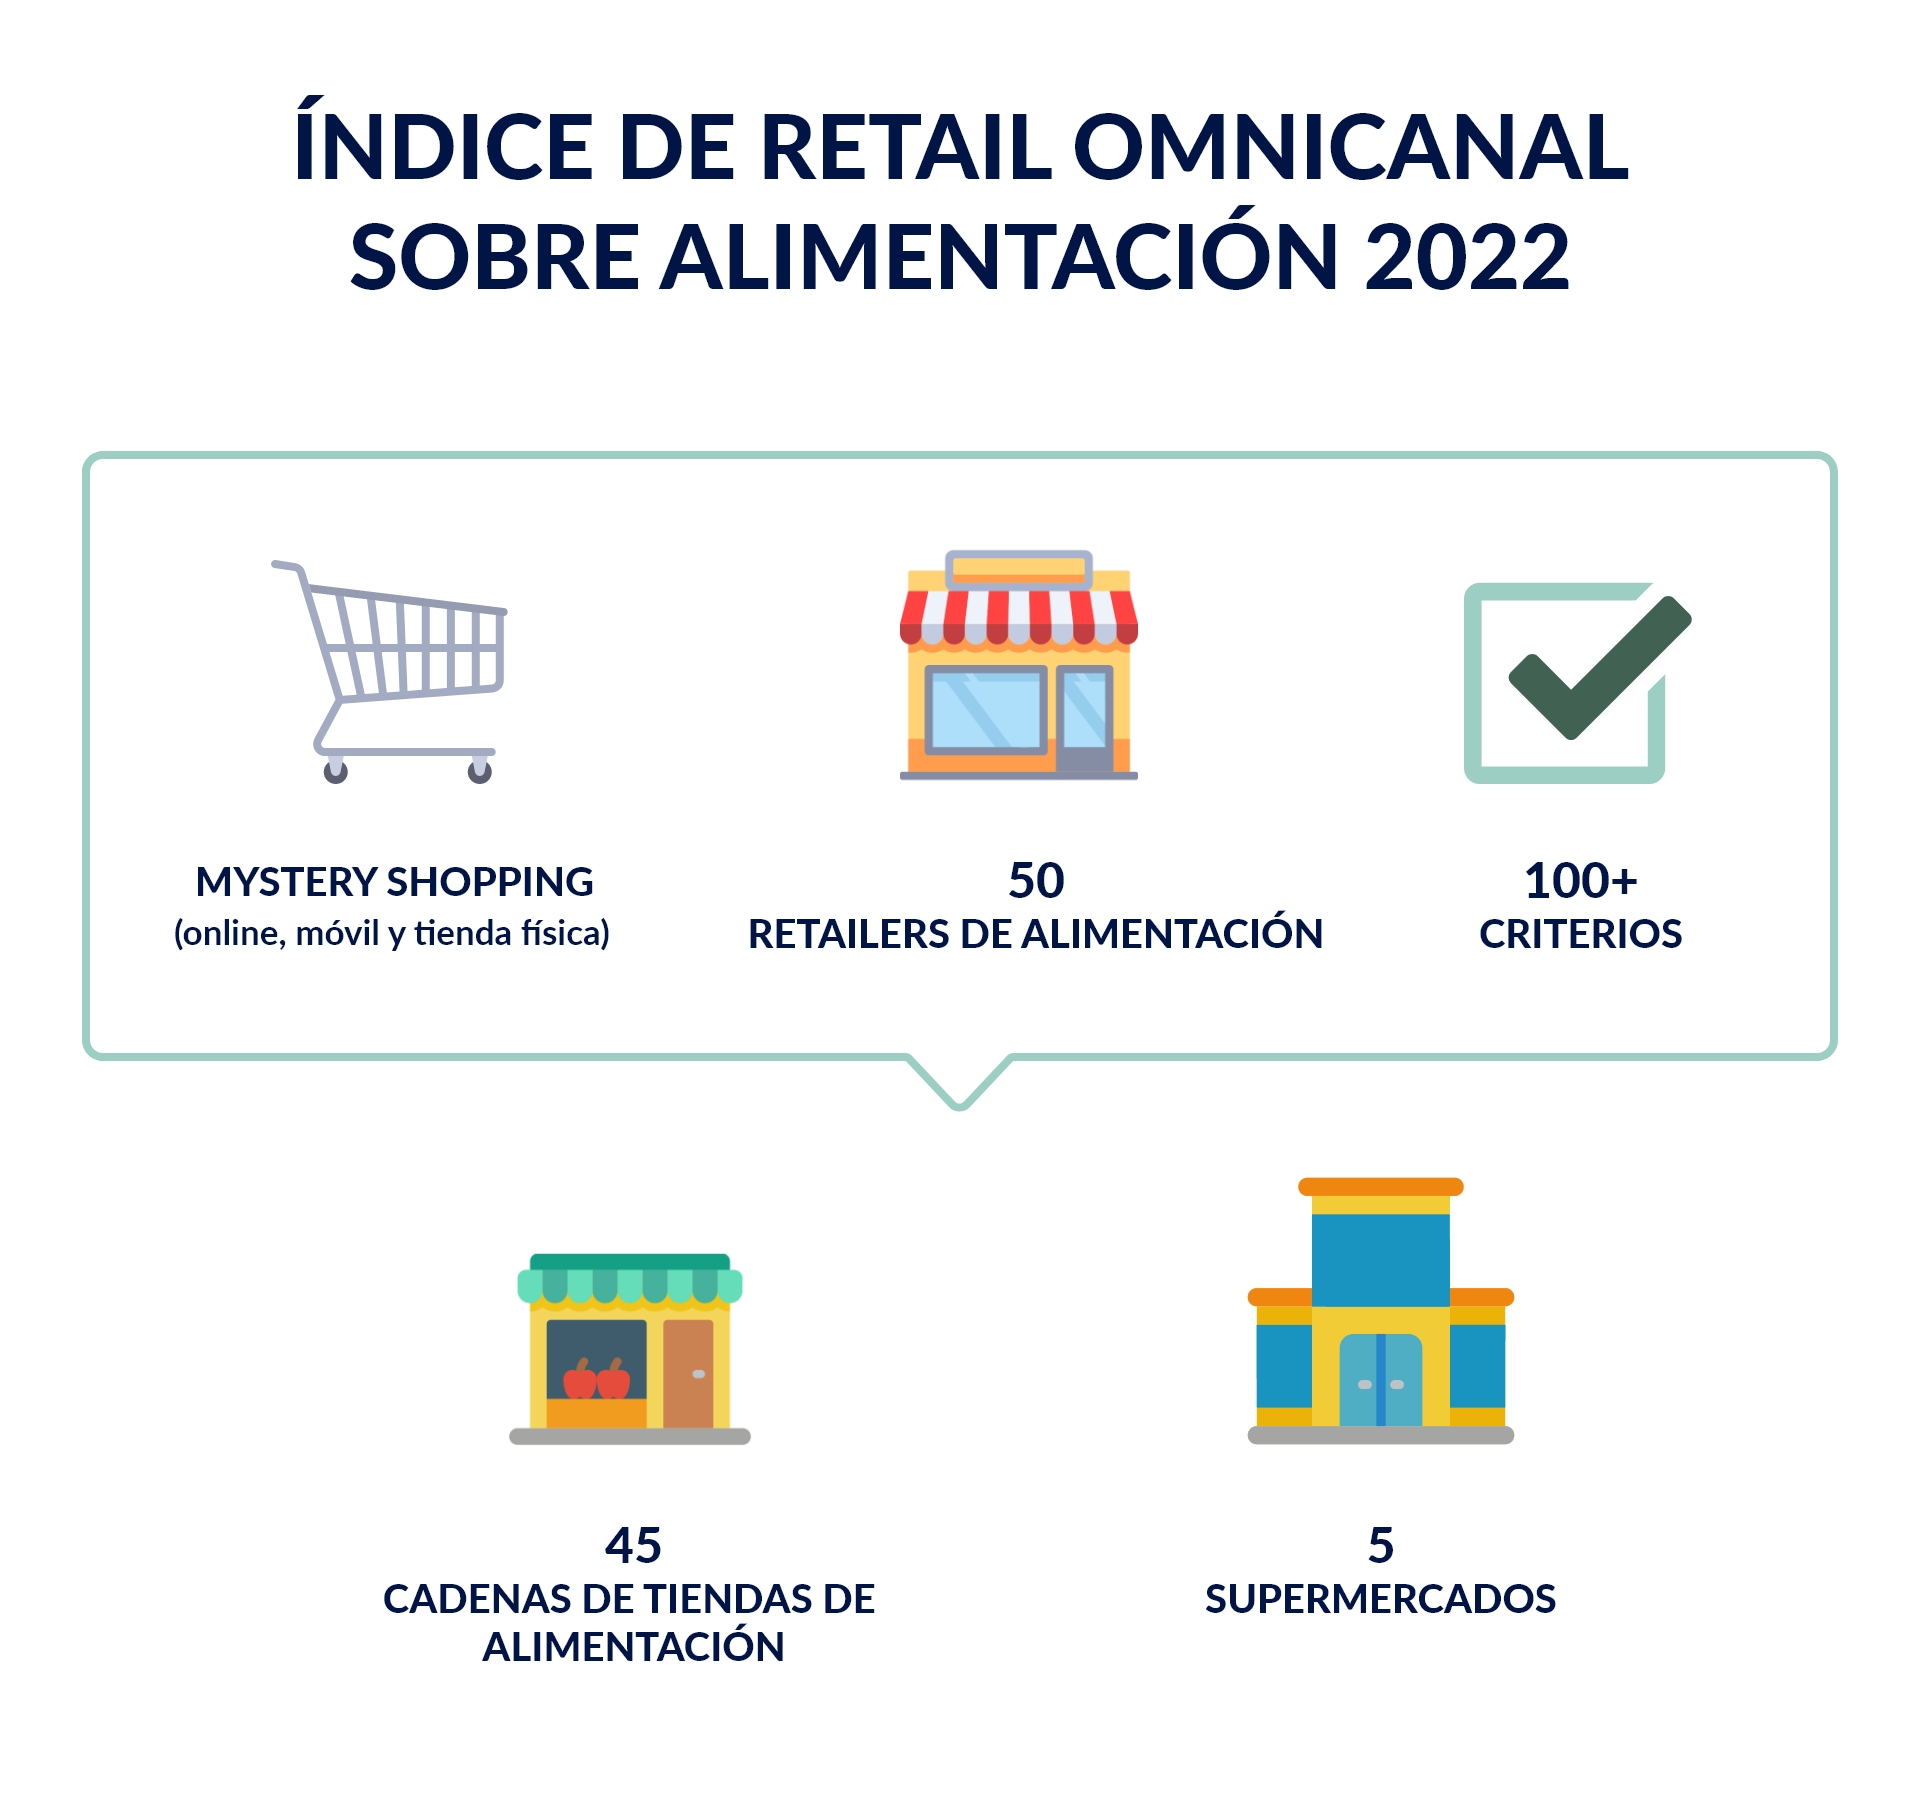 About Grocery Omnichannel Retail Index 2022 image